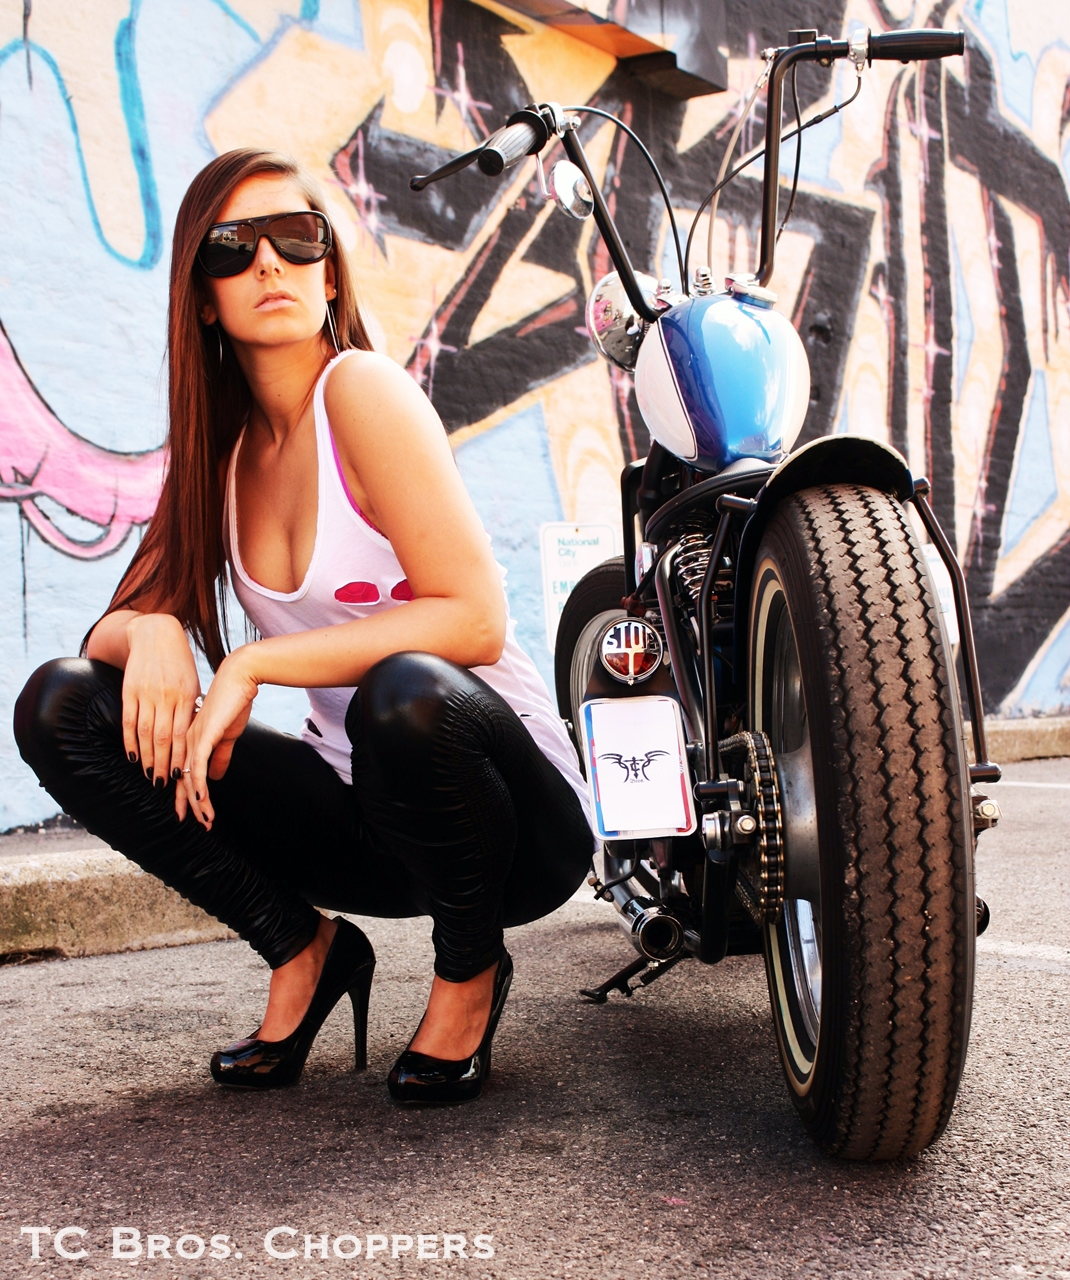 A woman posing in front of a motorcycle with TC Bros. 7/8" Ape Hanger Handlebars - 12" Black Powdercoated made of American steel tubing.